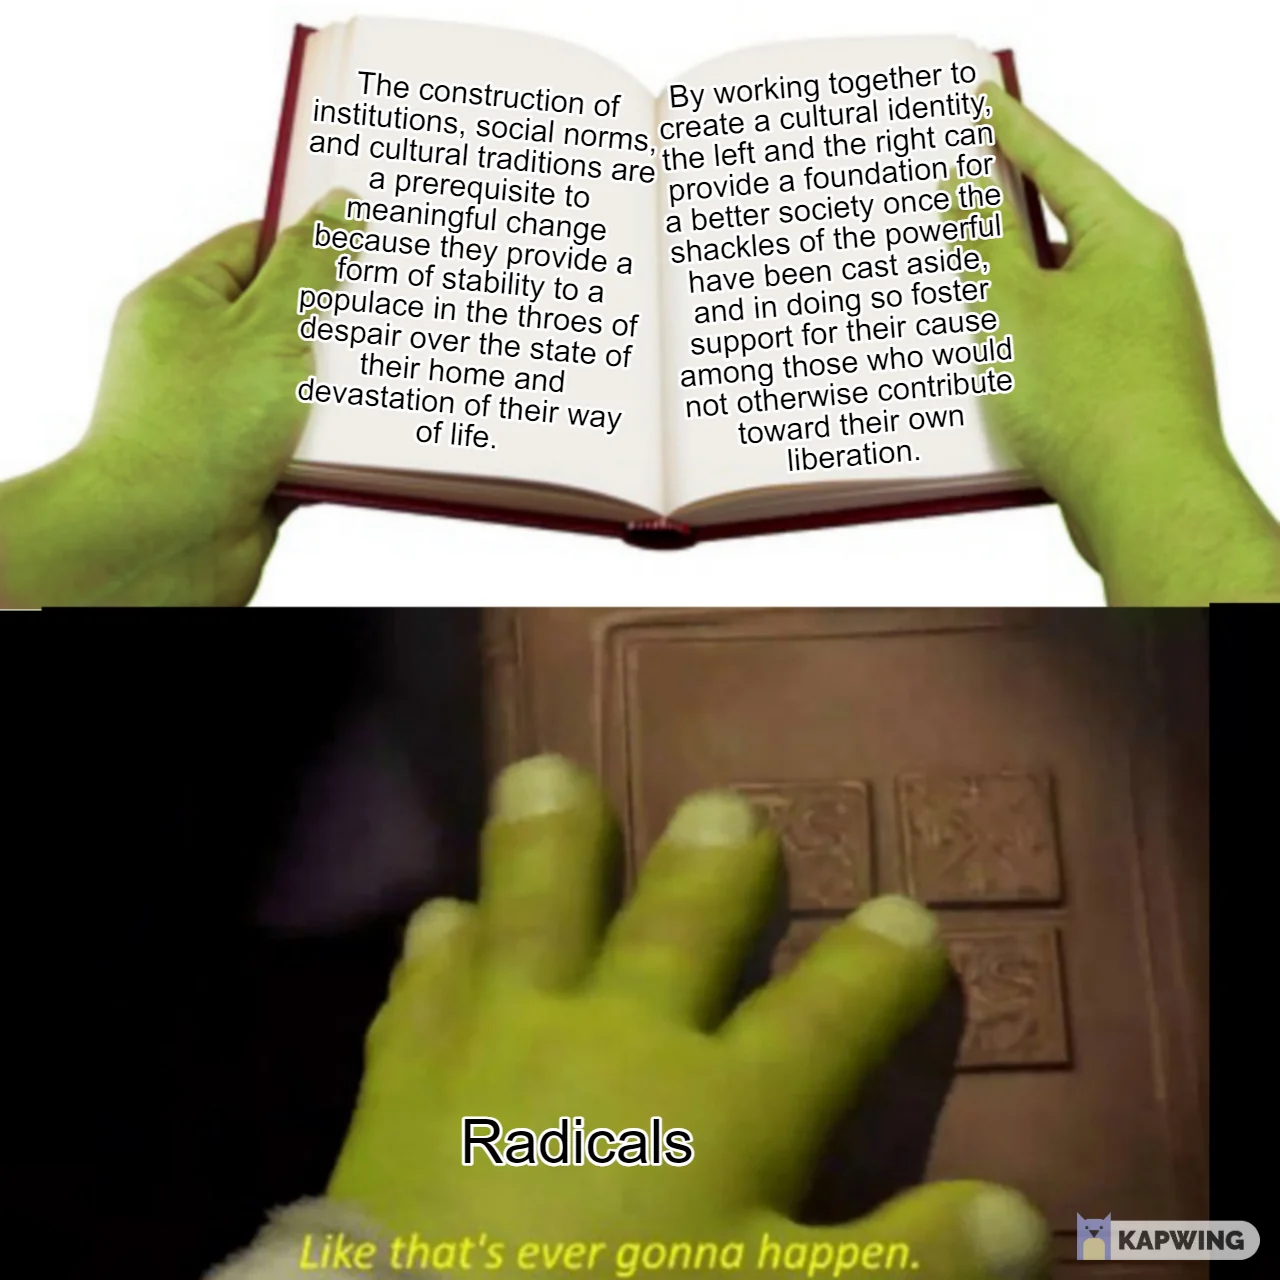 Picture has two panels. The first is Shrek's hands holding open a book. On the left page there is the text 'The
          construction of institutions, social norms, and cultural traditions are a prerequisite to meaningful change because they
          provide a form of stability to a populace in the throes of despair over the state of their home and devastation of their
          way of life.' the text on the right page says 'By working together to create a cultural identity, the left and the right
          can provide a foundation for a better society once the shackles of the powerful have been cast aside, and in doing so
          foster support for their cause among those who would not otherwise contribute toward their own liberation.' there's a lot
          of text on the first panel... the second panel is shorter though, as it's just Shrek slamming the book closed and saying
          'Like that's ever gonna happen.' Shrek's arm in this panel has the text 'Radicals' on it.